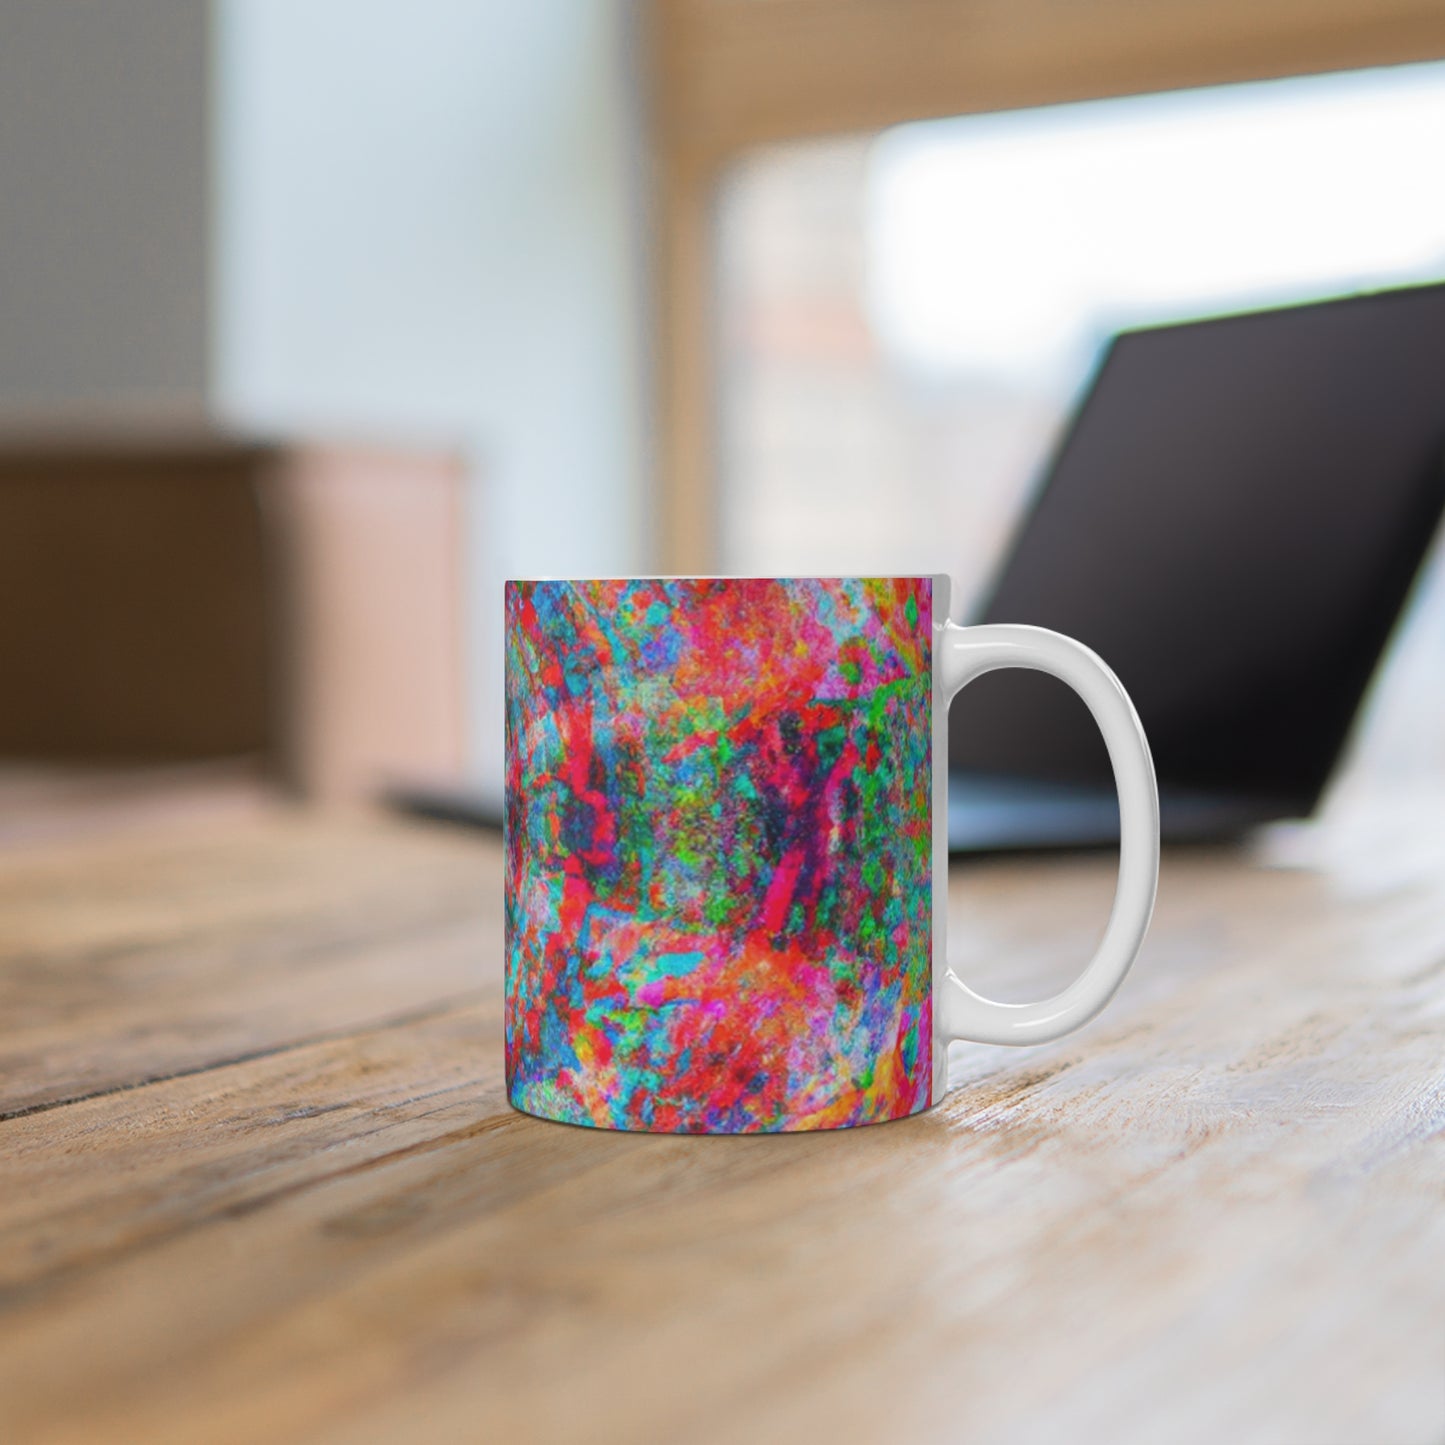 Vernon's Gourmet Coffee - Psychedelic Coffee Cup Mug 11 Ounce